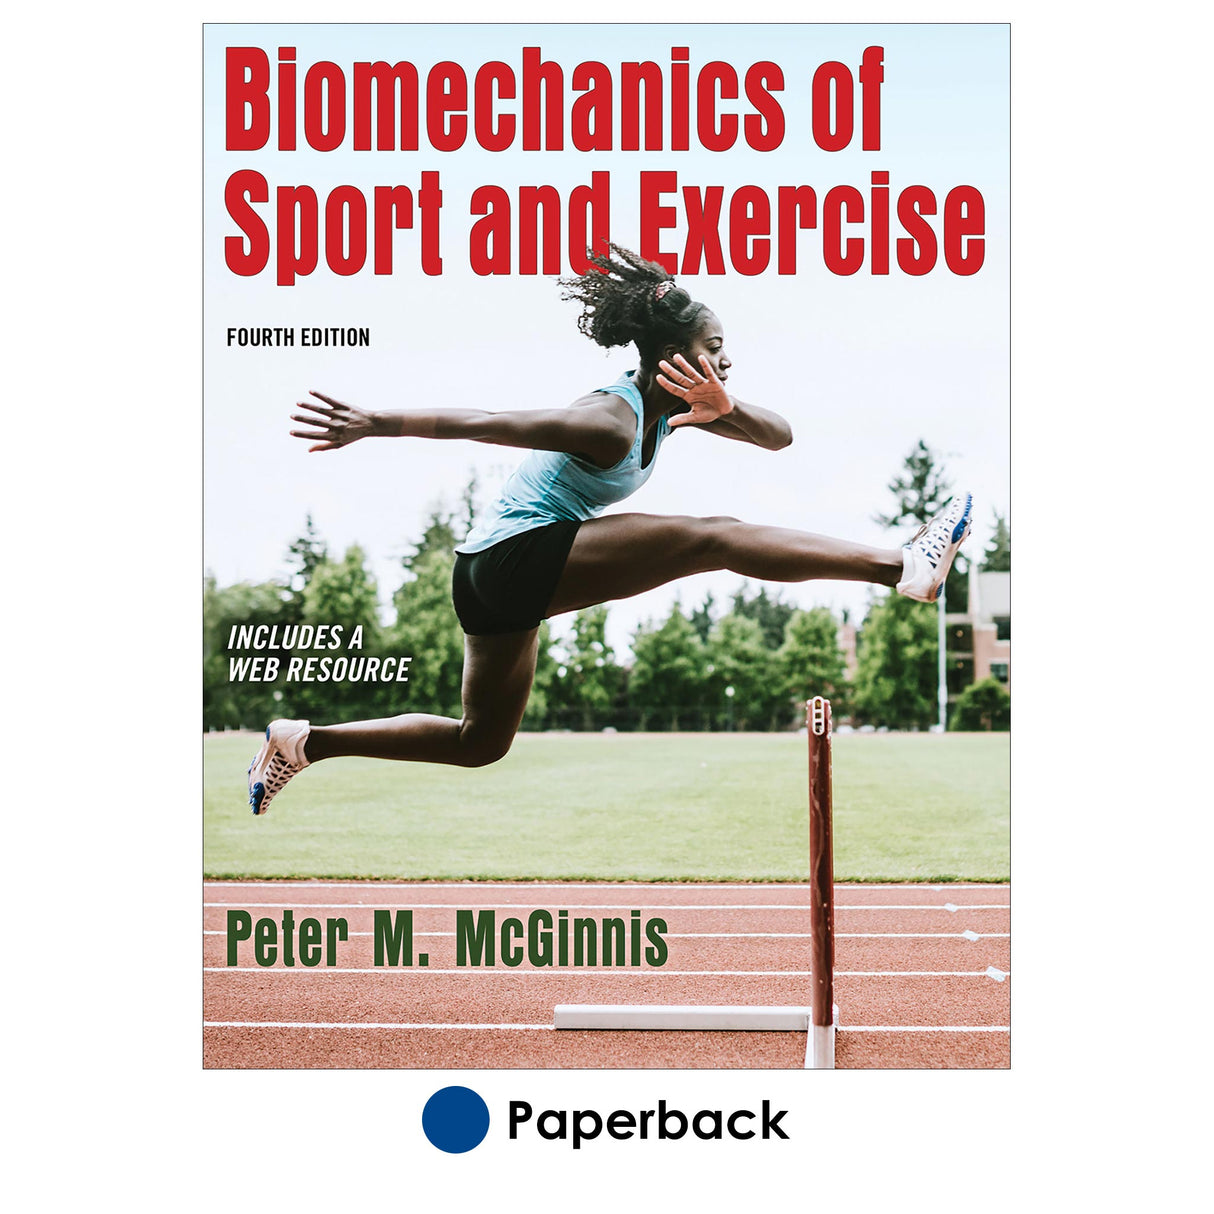 Biomechanics of Sport and Exercise 4th Edition With Web Resource